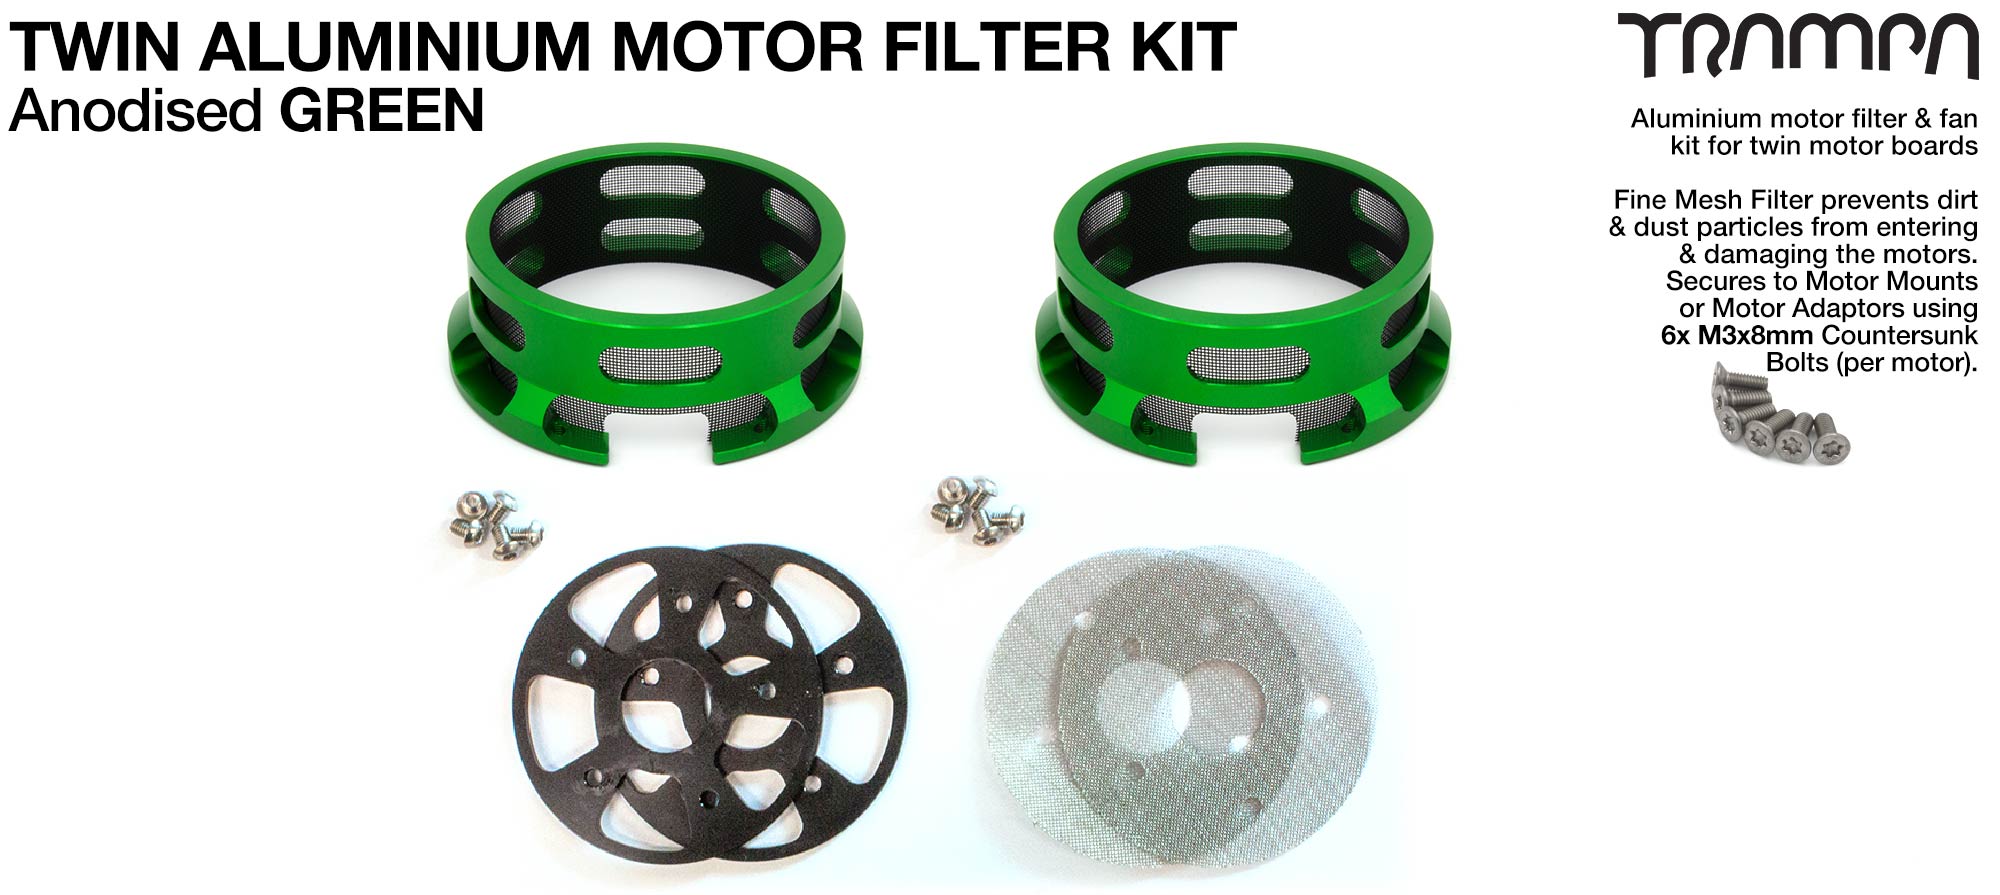 HALF CAGE Motor protection  - GREEN anodised with Filters - TWIN